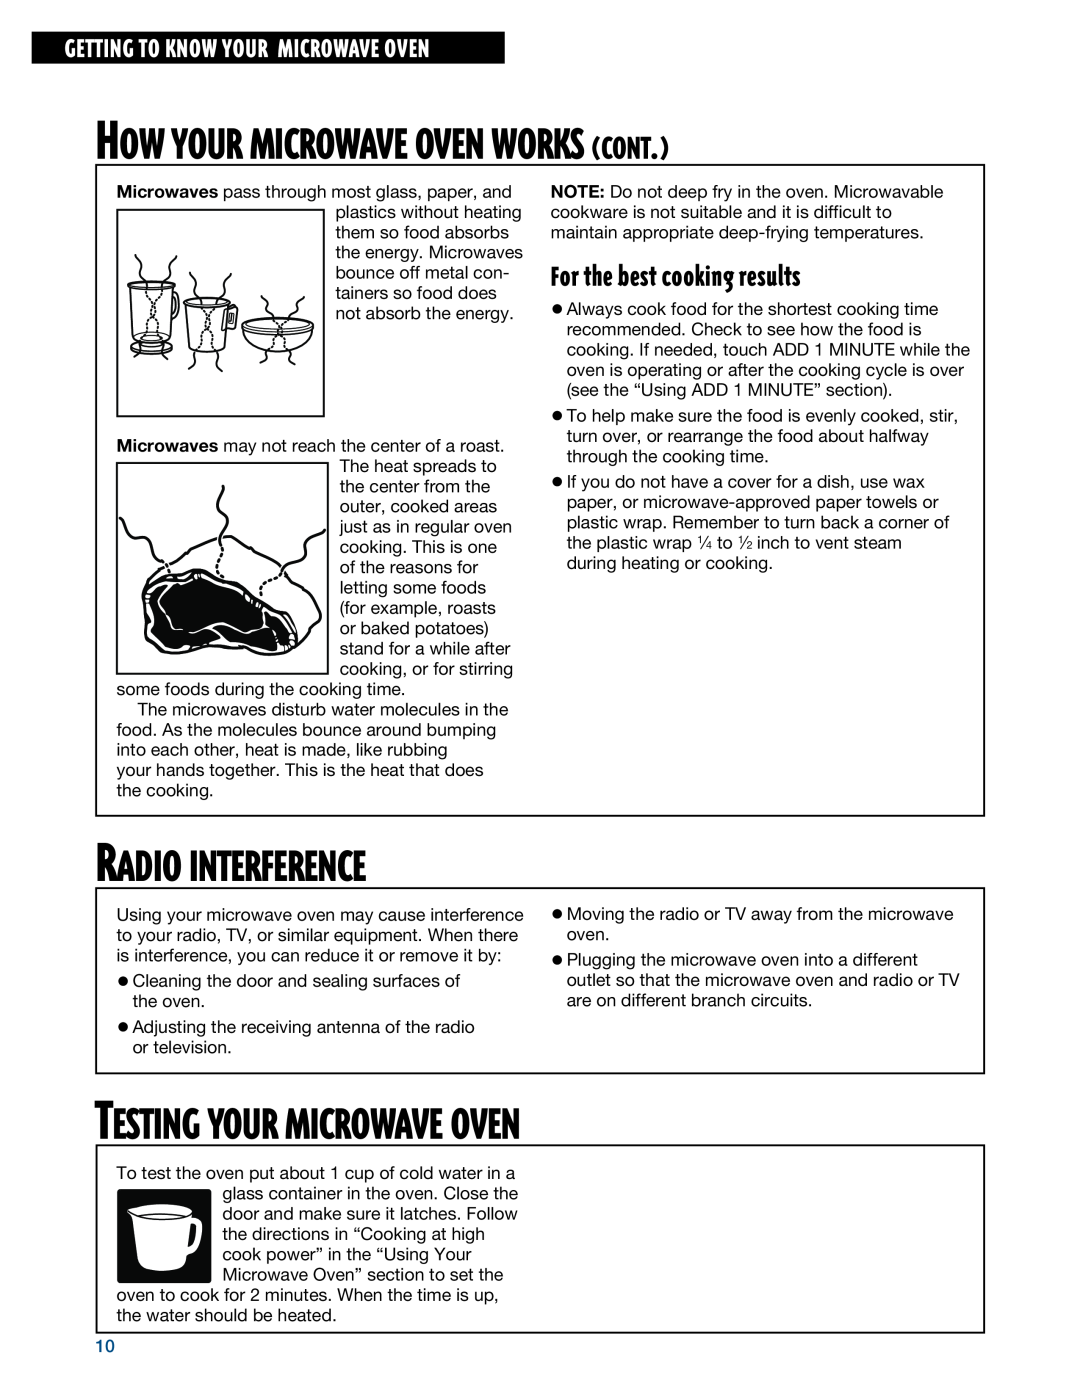 Whirlpool MHE14RF installation instructions Radio Interference, Testing Your Microwave Oven, For the best cooking results 